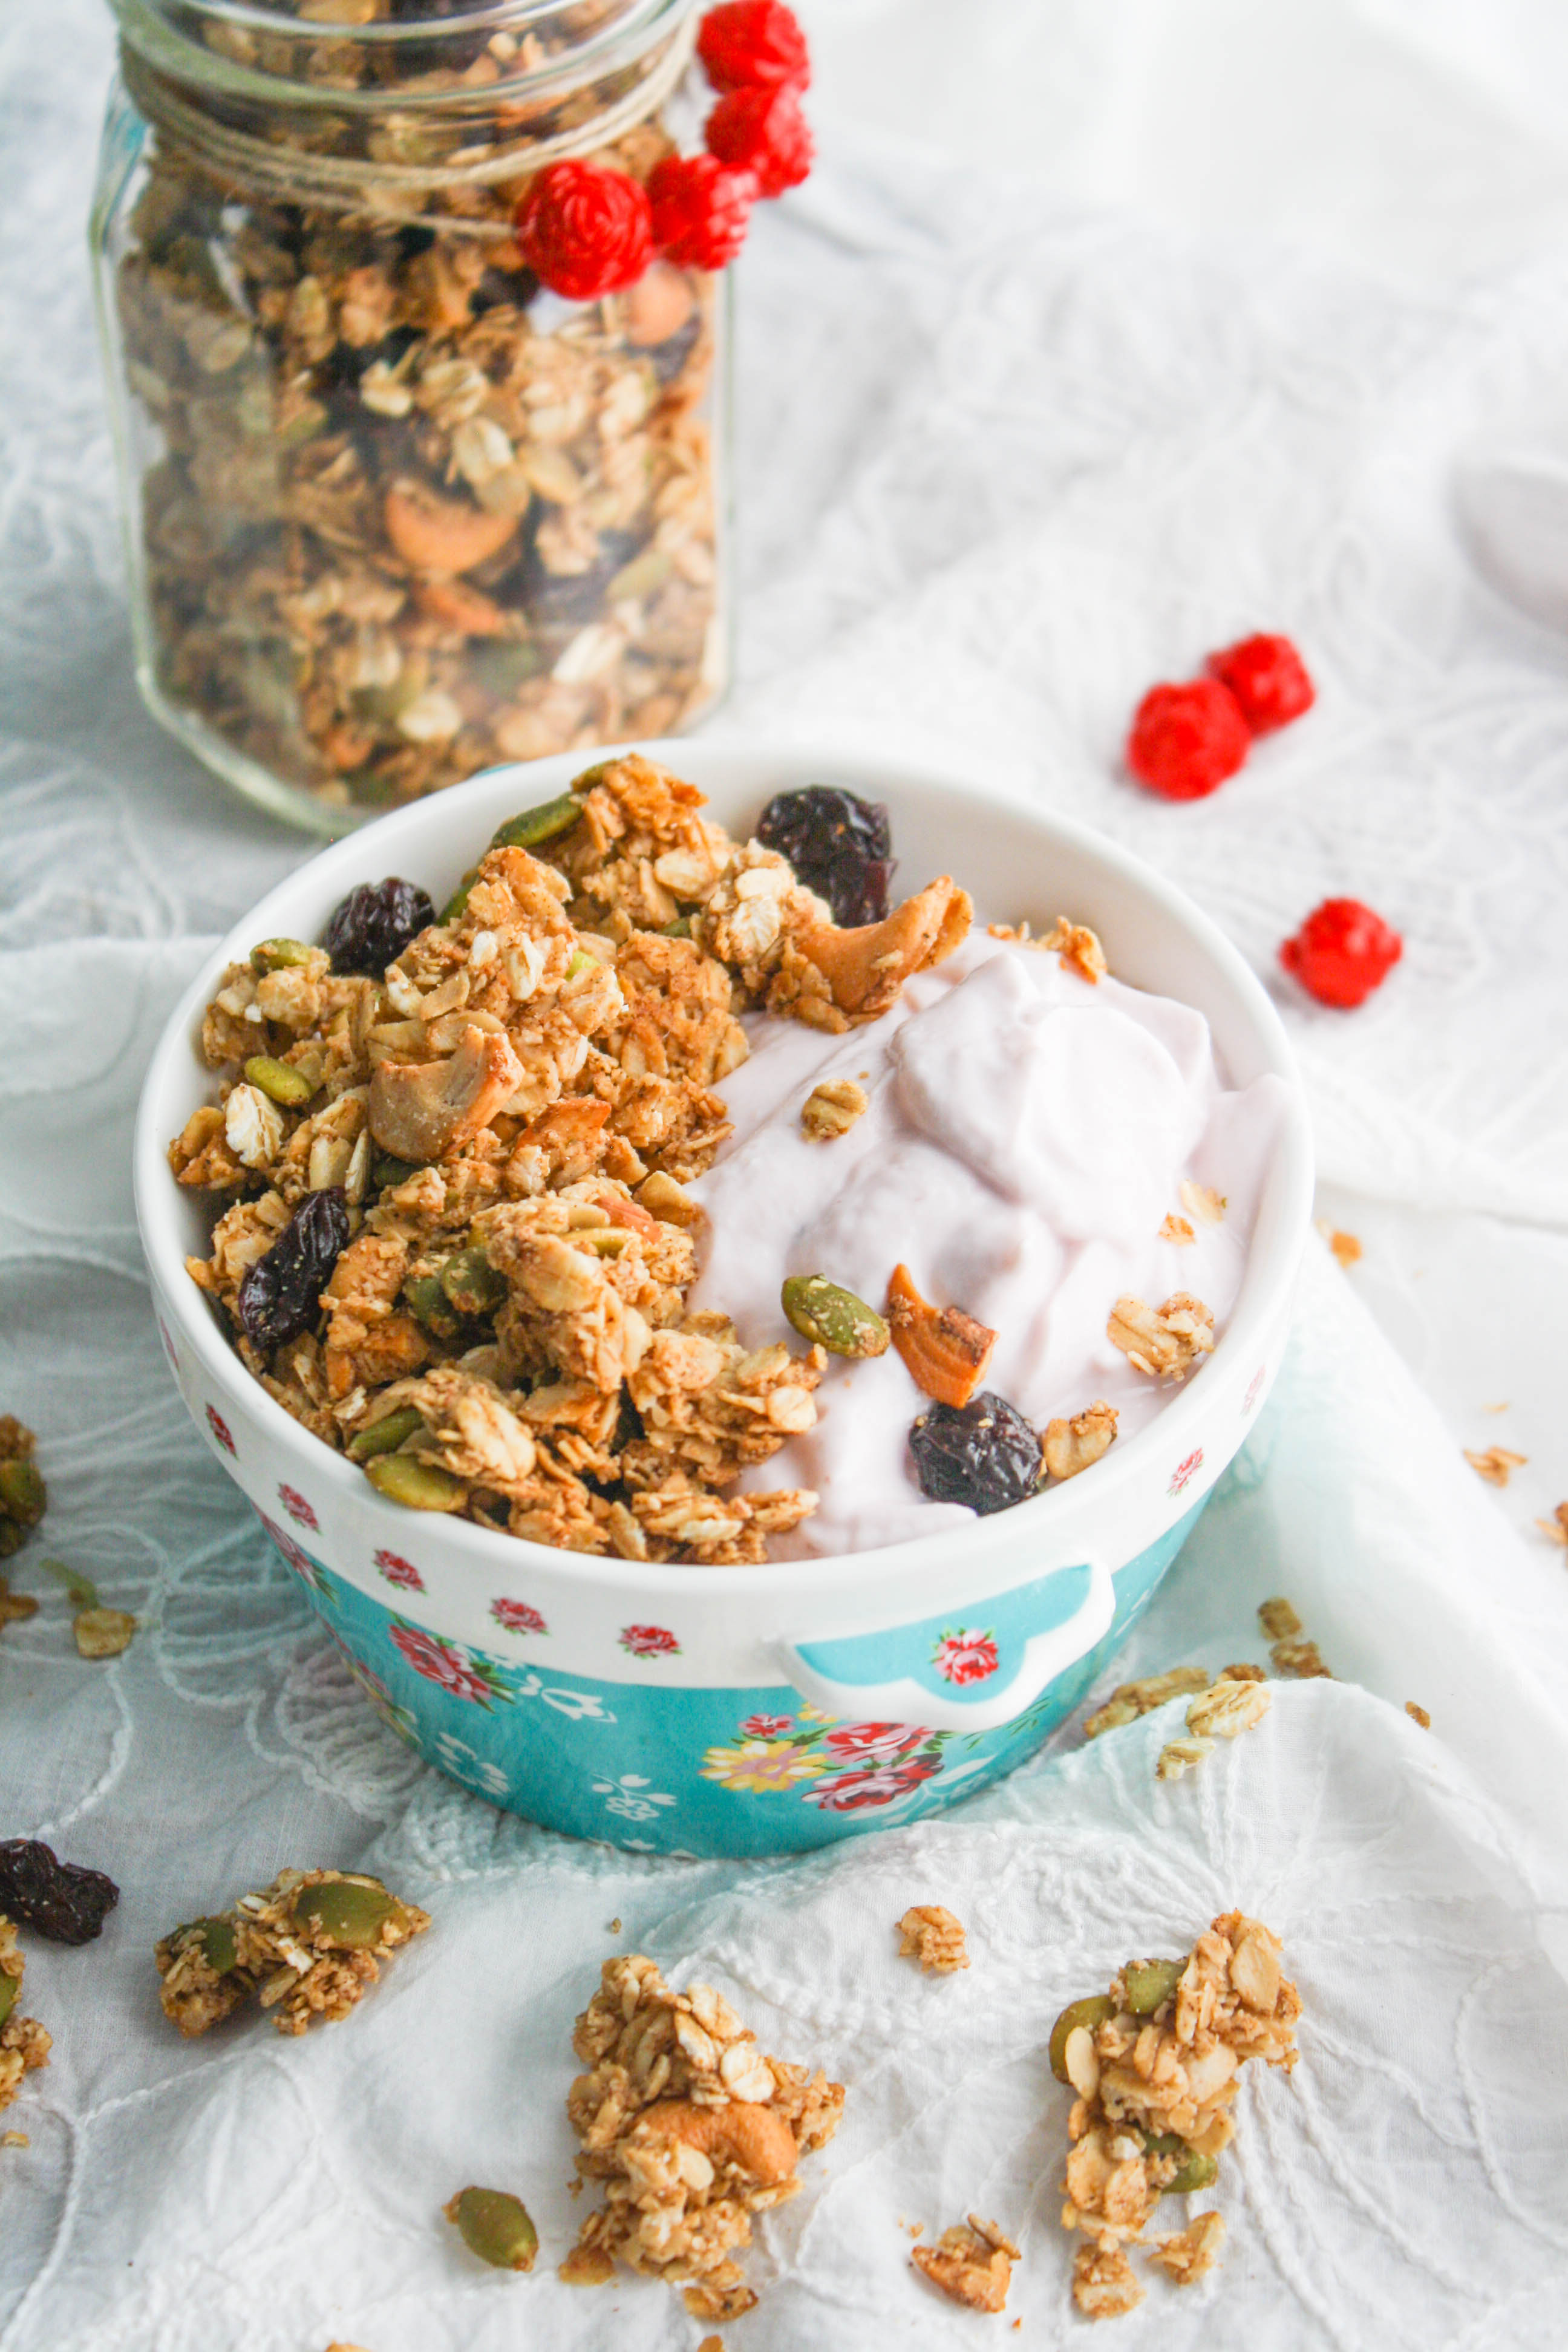 Chunky Cherry-Chai Granola is perfect served over yogurt! Homemade granola goes perfectly with yogurt and so much more!